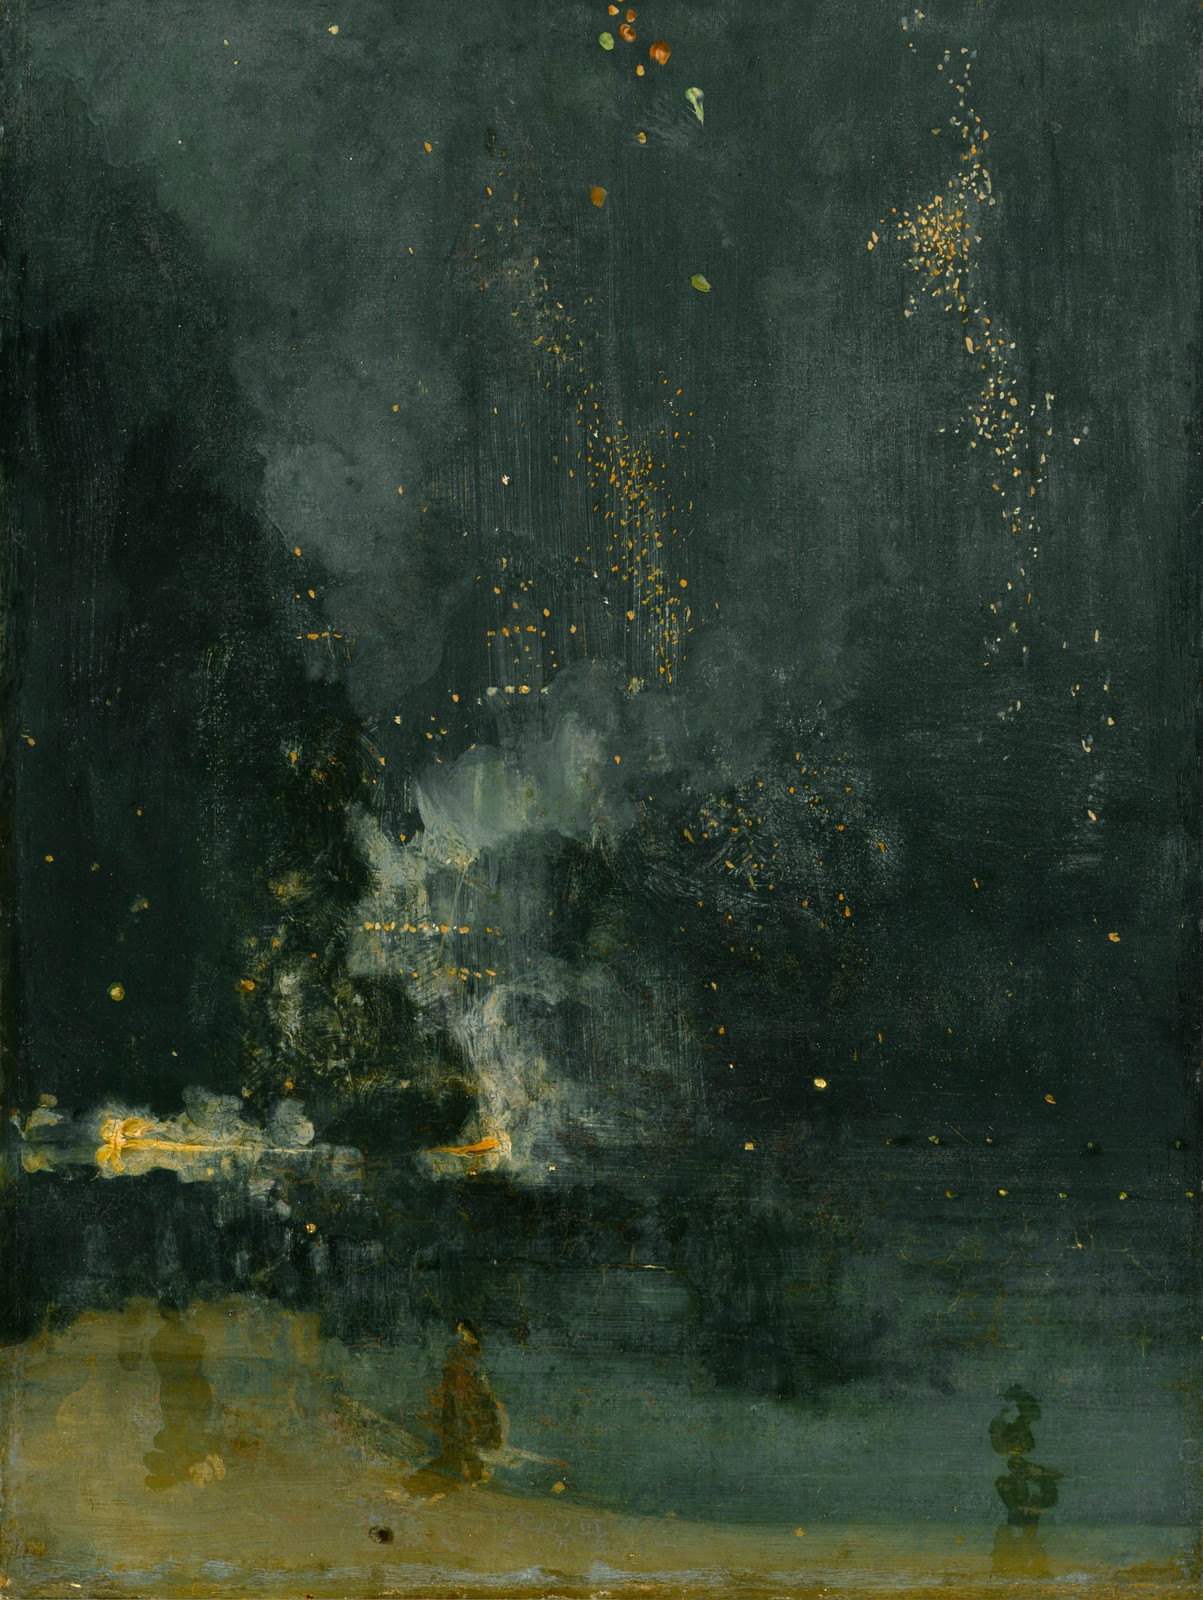 James Abbott McNeill Whistler. Nocturne in Black and Gold. The Falling Rocket, 1872-77.